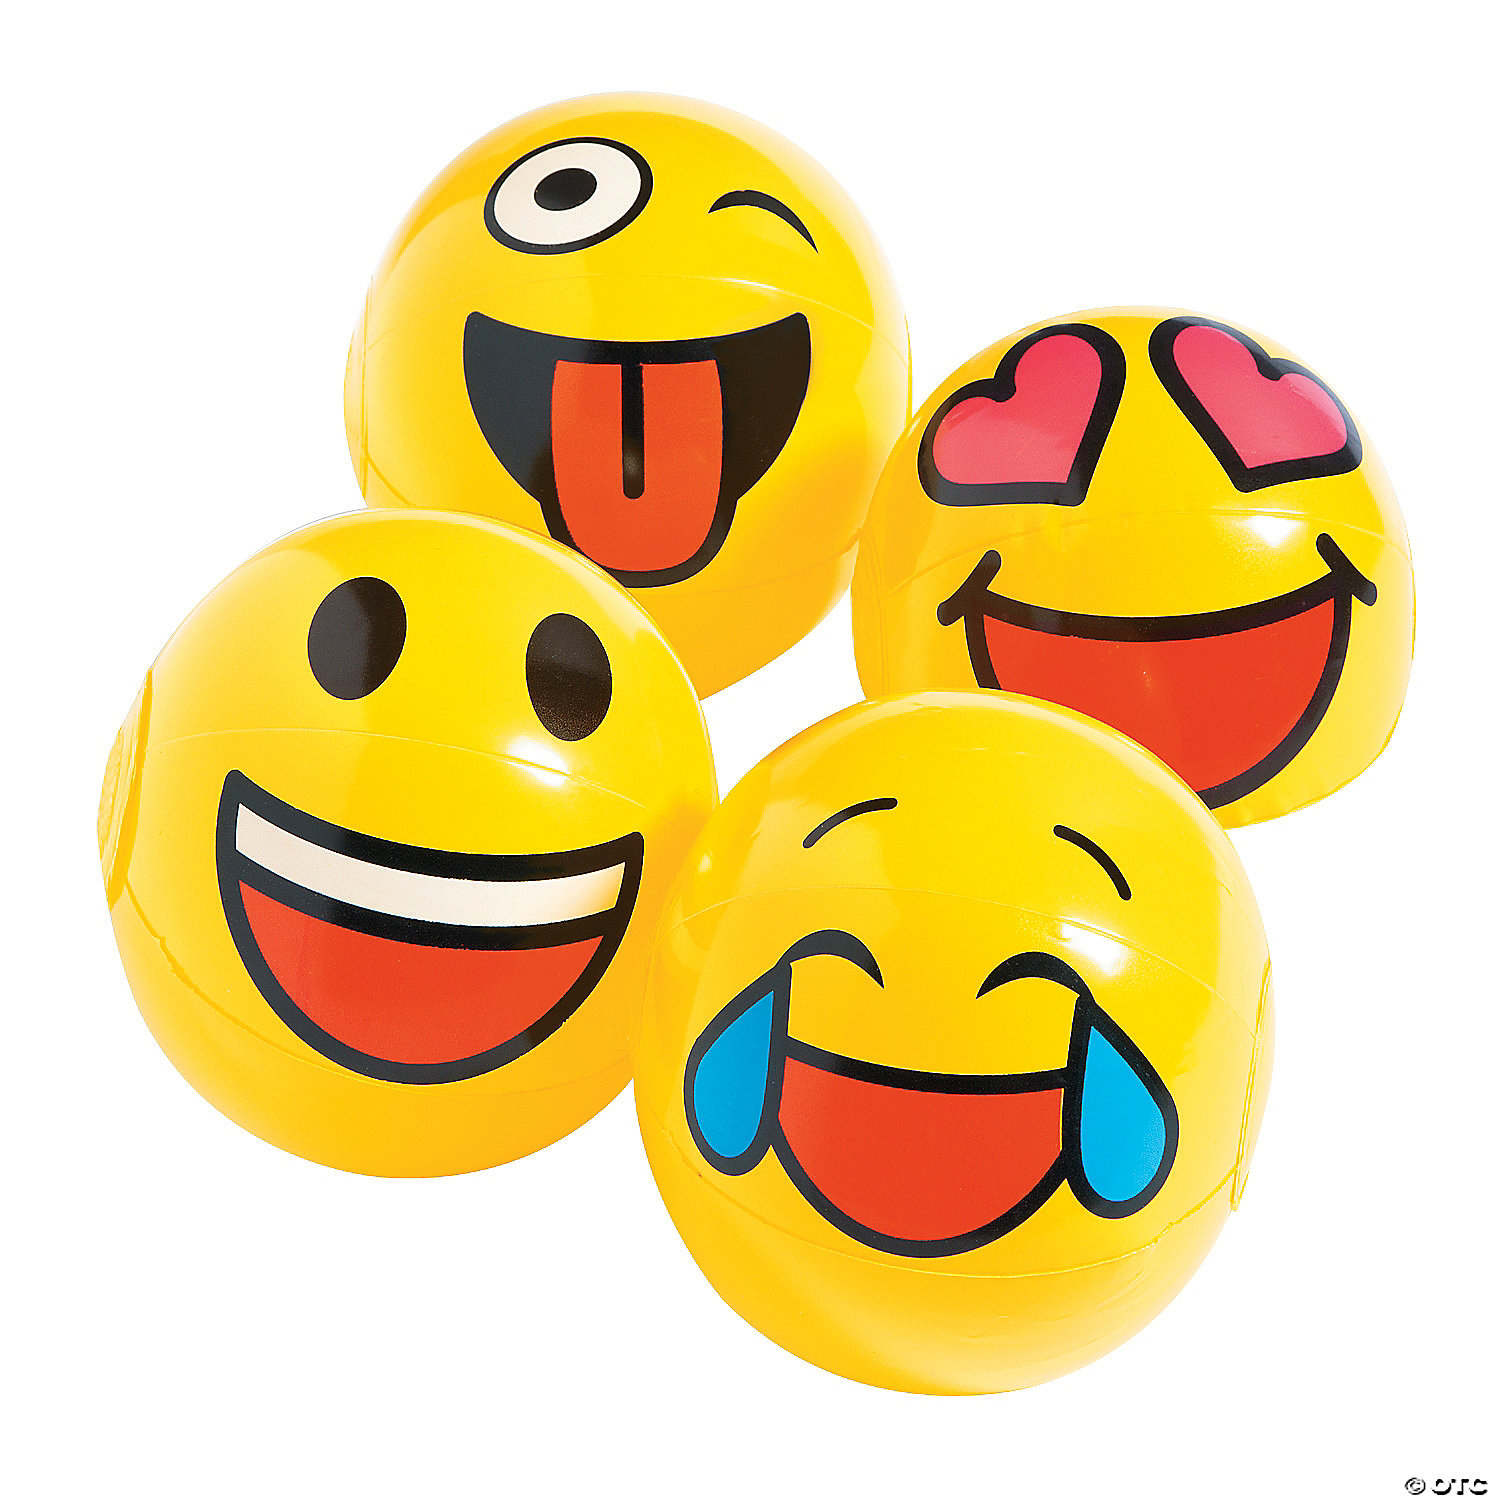 12 NEW LARGE YELLOW SMILE FACE INFLATABLE BEACH BALLS  POOL BEACHBALL OCEAN 15" 